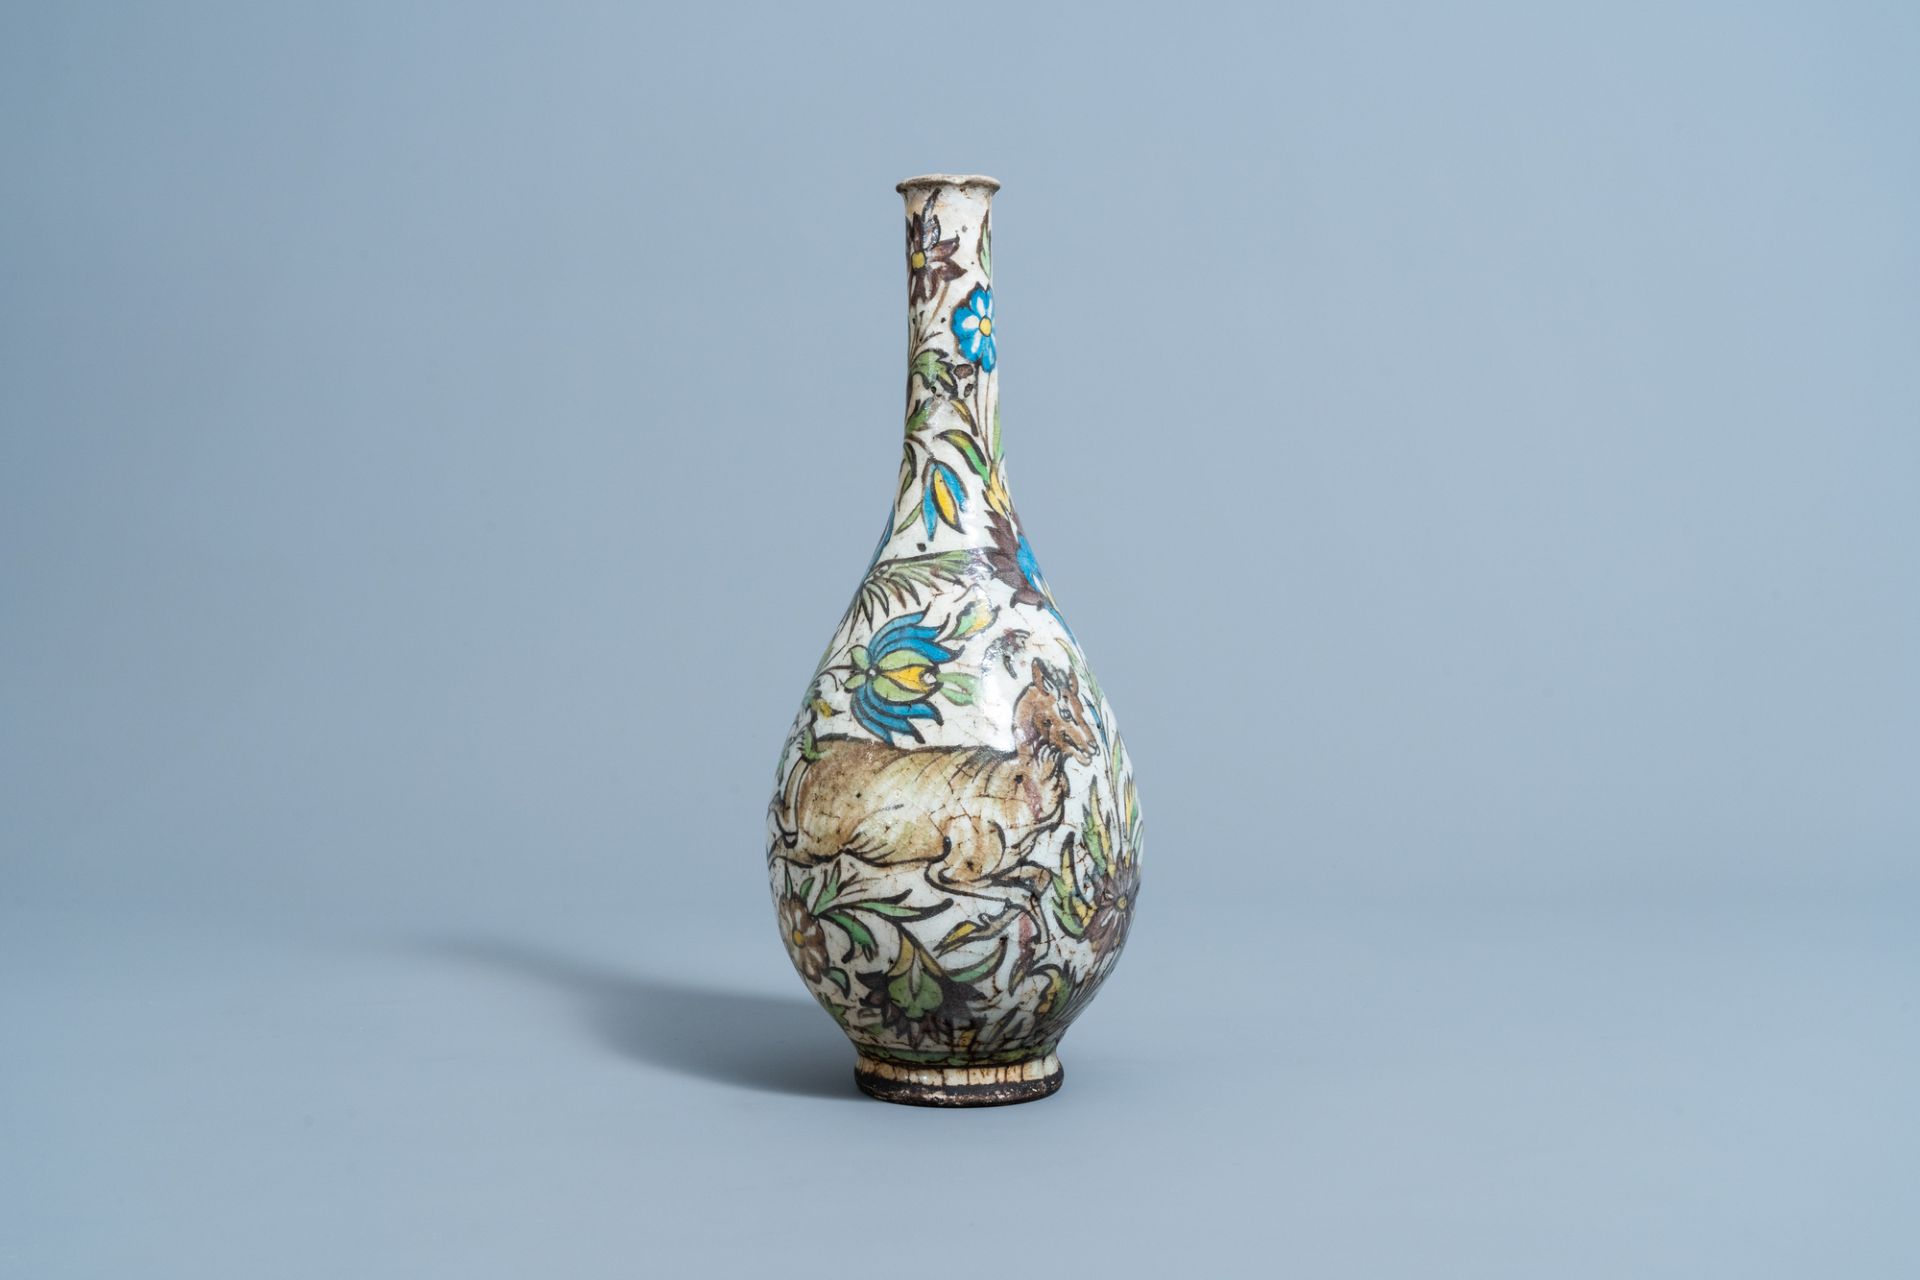 A Qajar polychrome bottle shaped vase with animals and floral design, Iran, 19th C. - Image 3 of 6